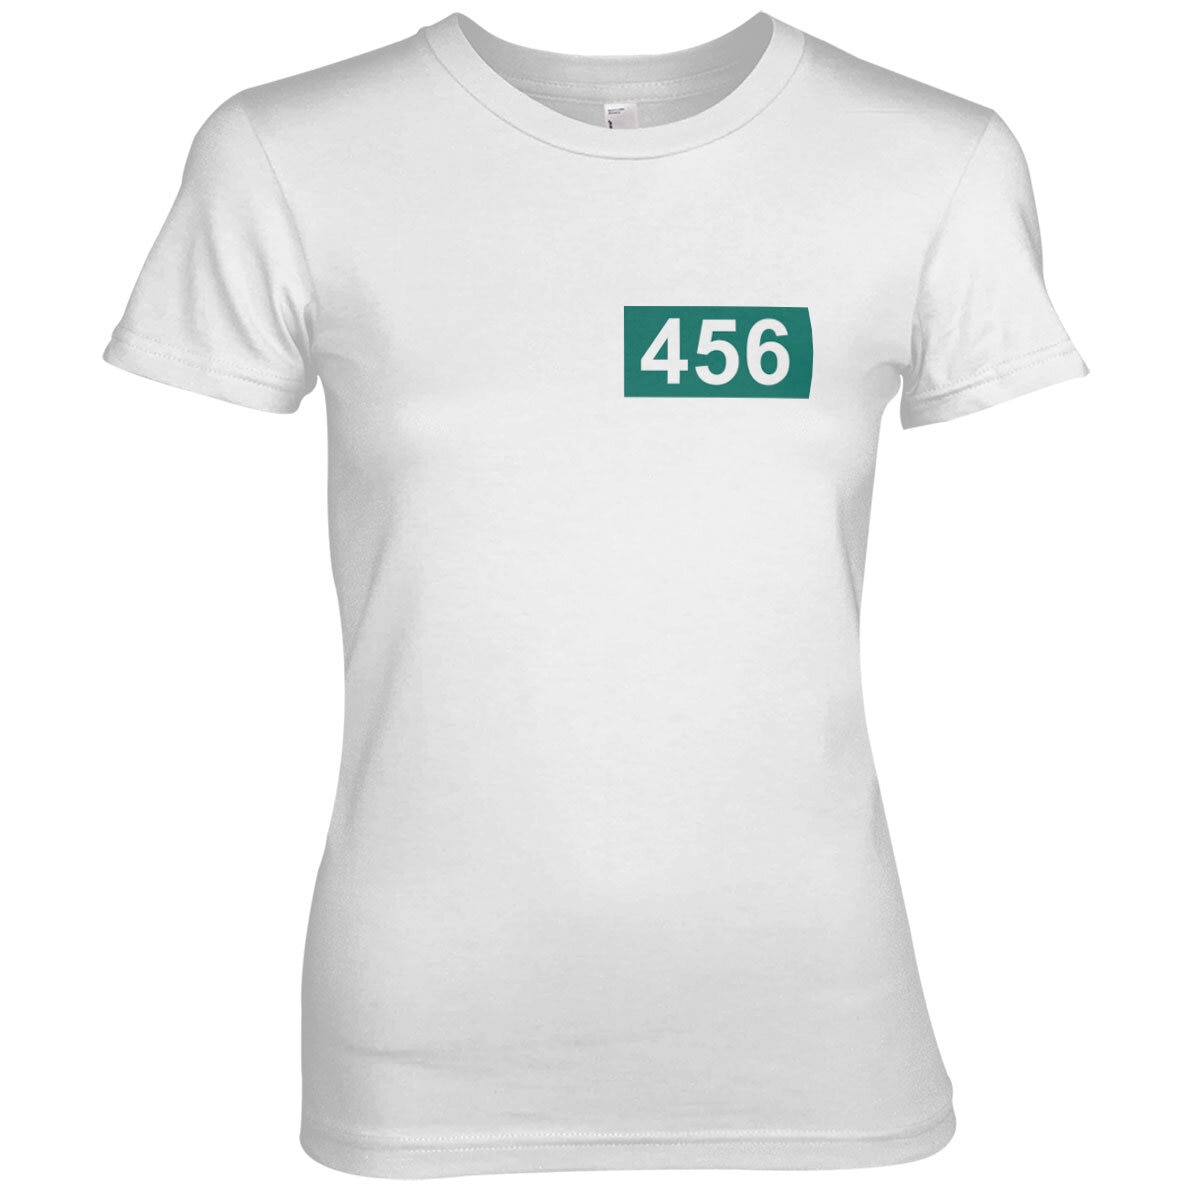 Squid Game 456 Girly Tee